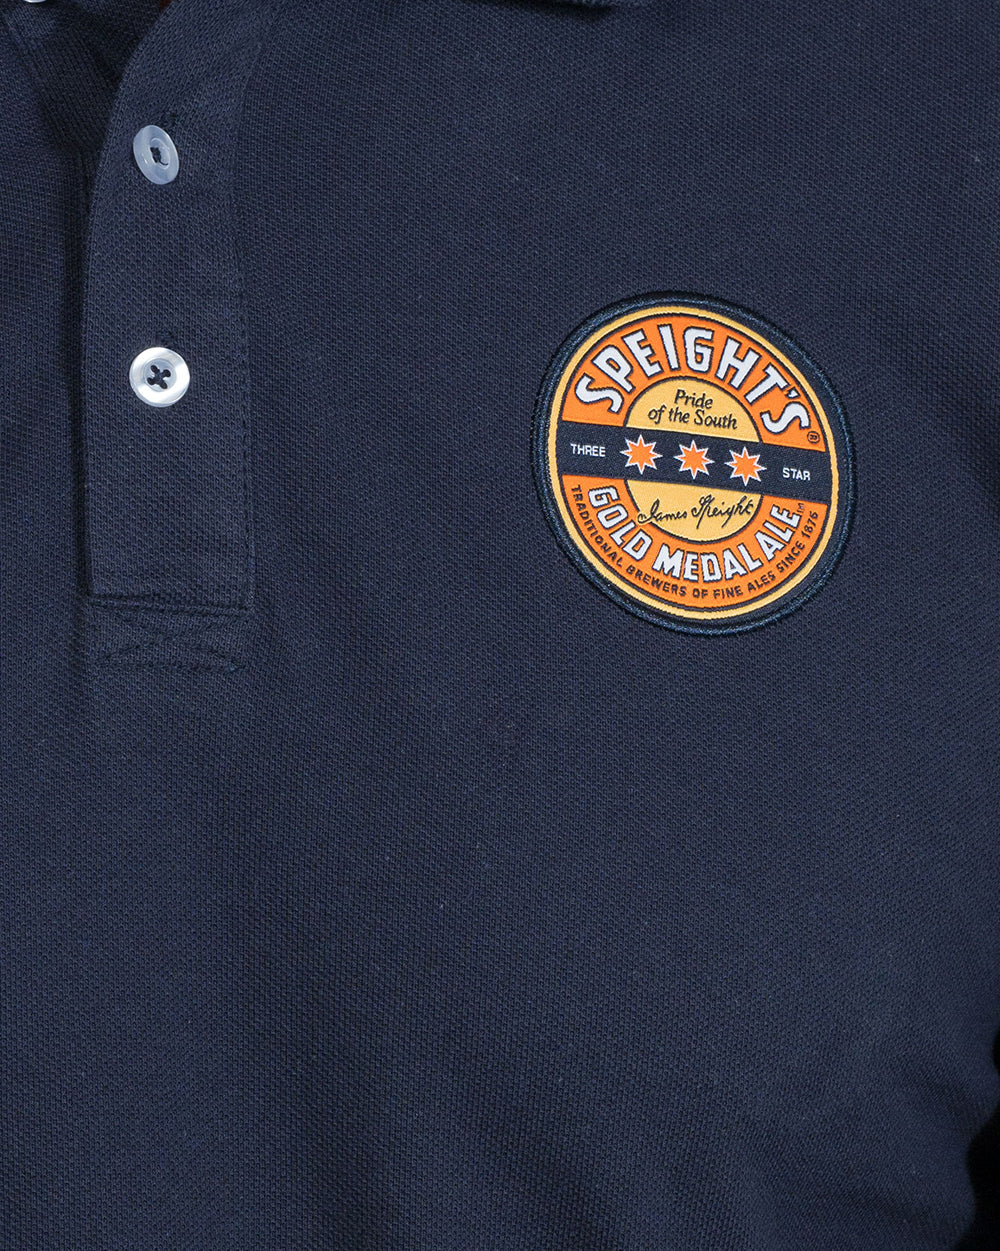 Speight's Retro Long Sleeve Polo -  Beer Gear Apparel & Merchandise - Speights - Lion Red - VB - Tokyo Dy merch